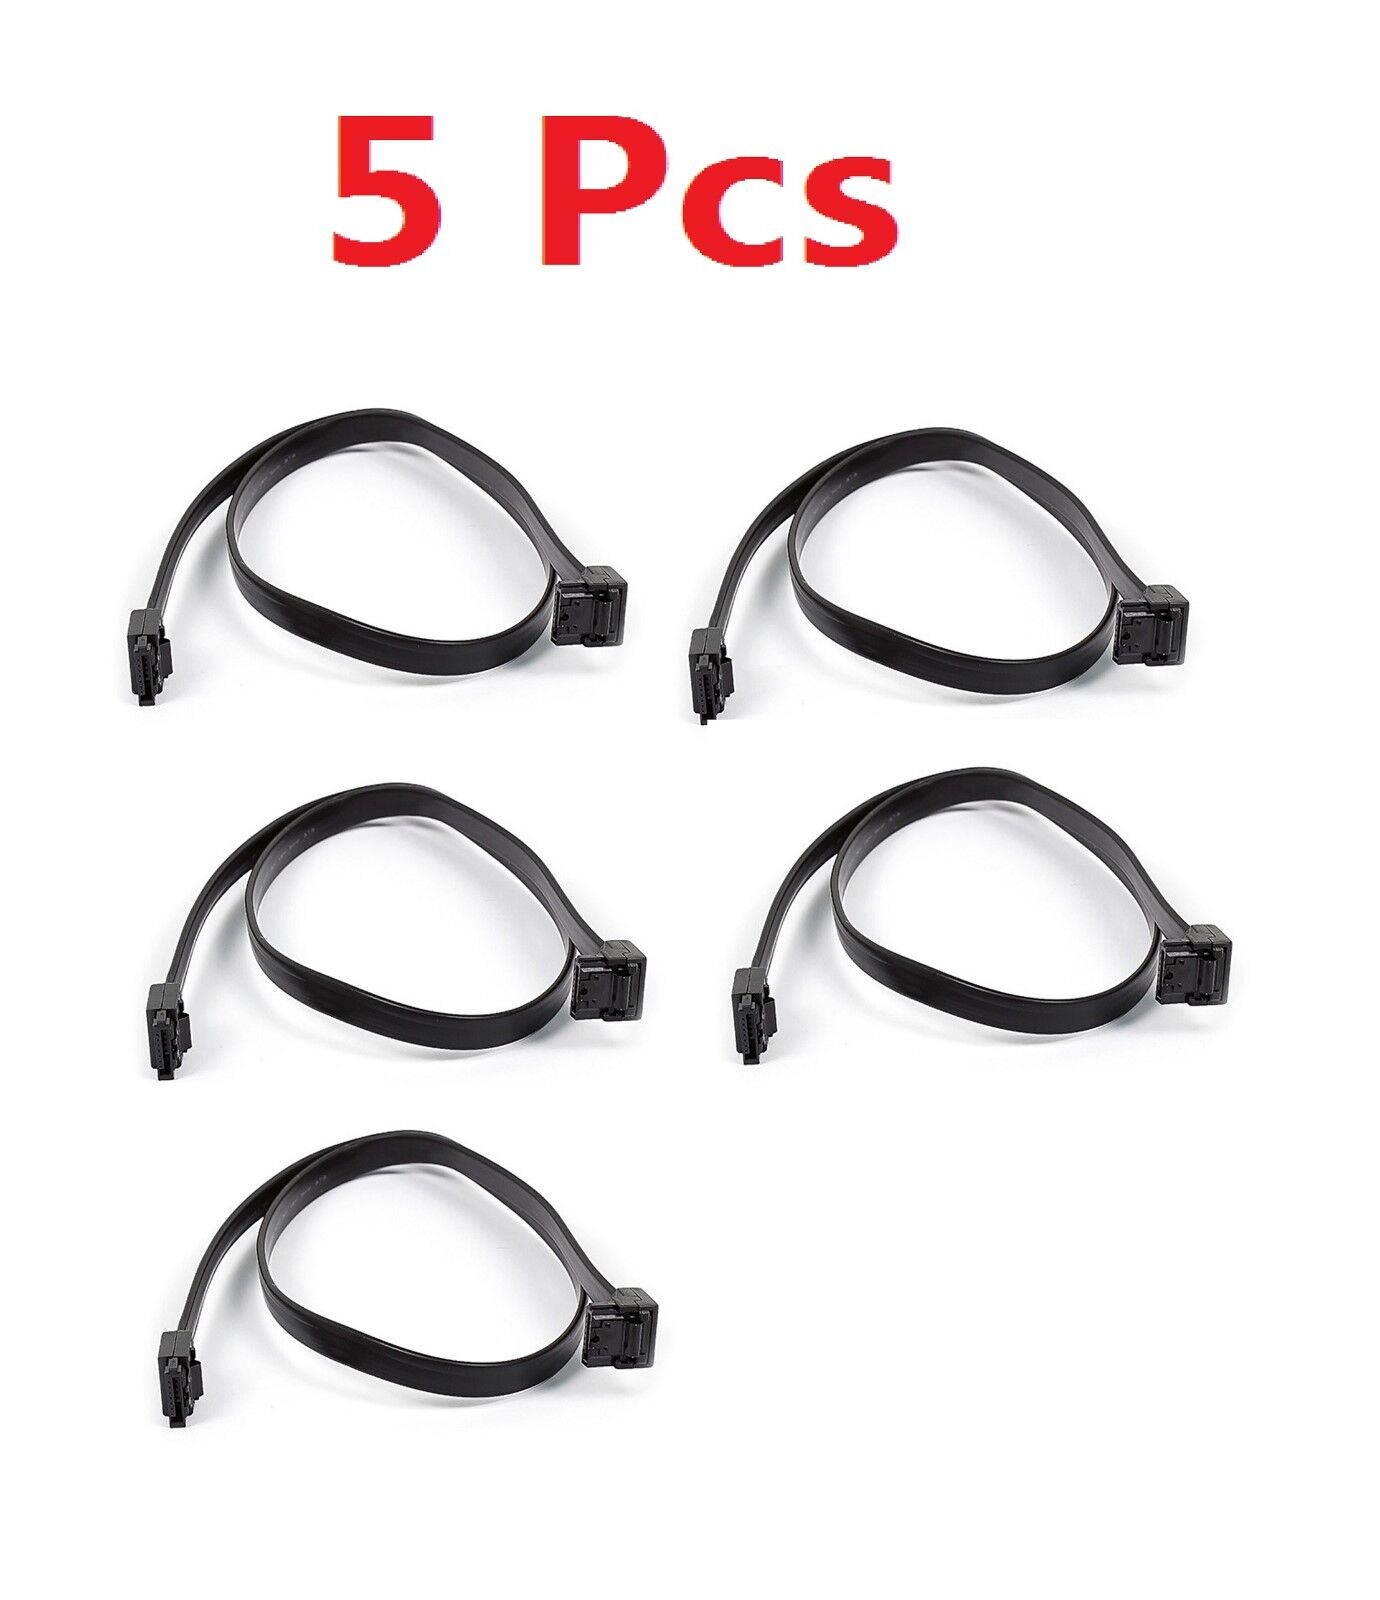 5x 18-Inch SATA III 6.0 Gbps Cable with Locking Latch and 90-Degree Plug - Black